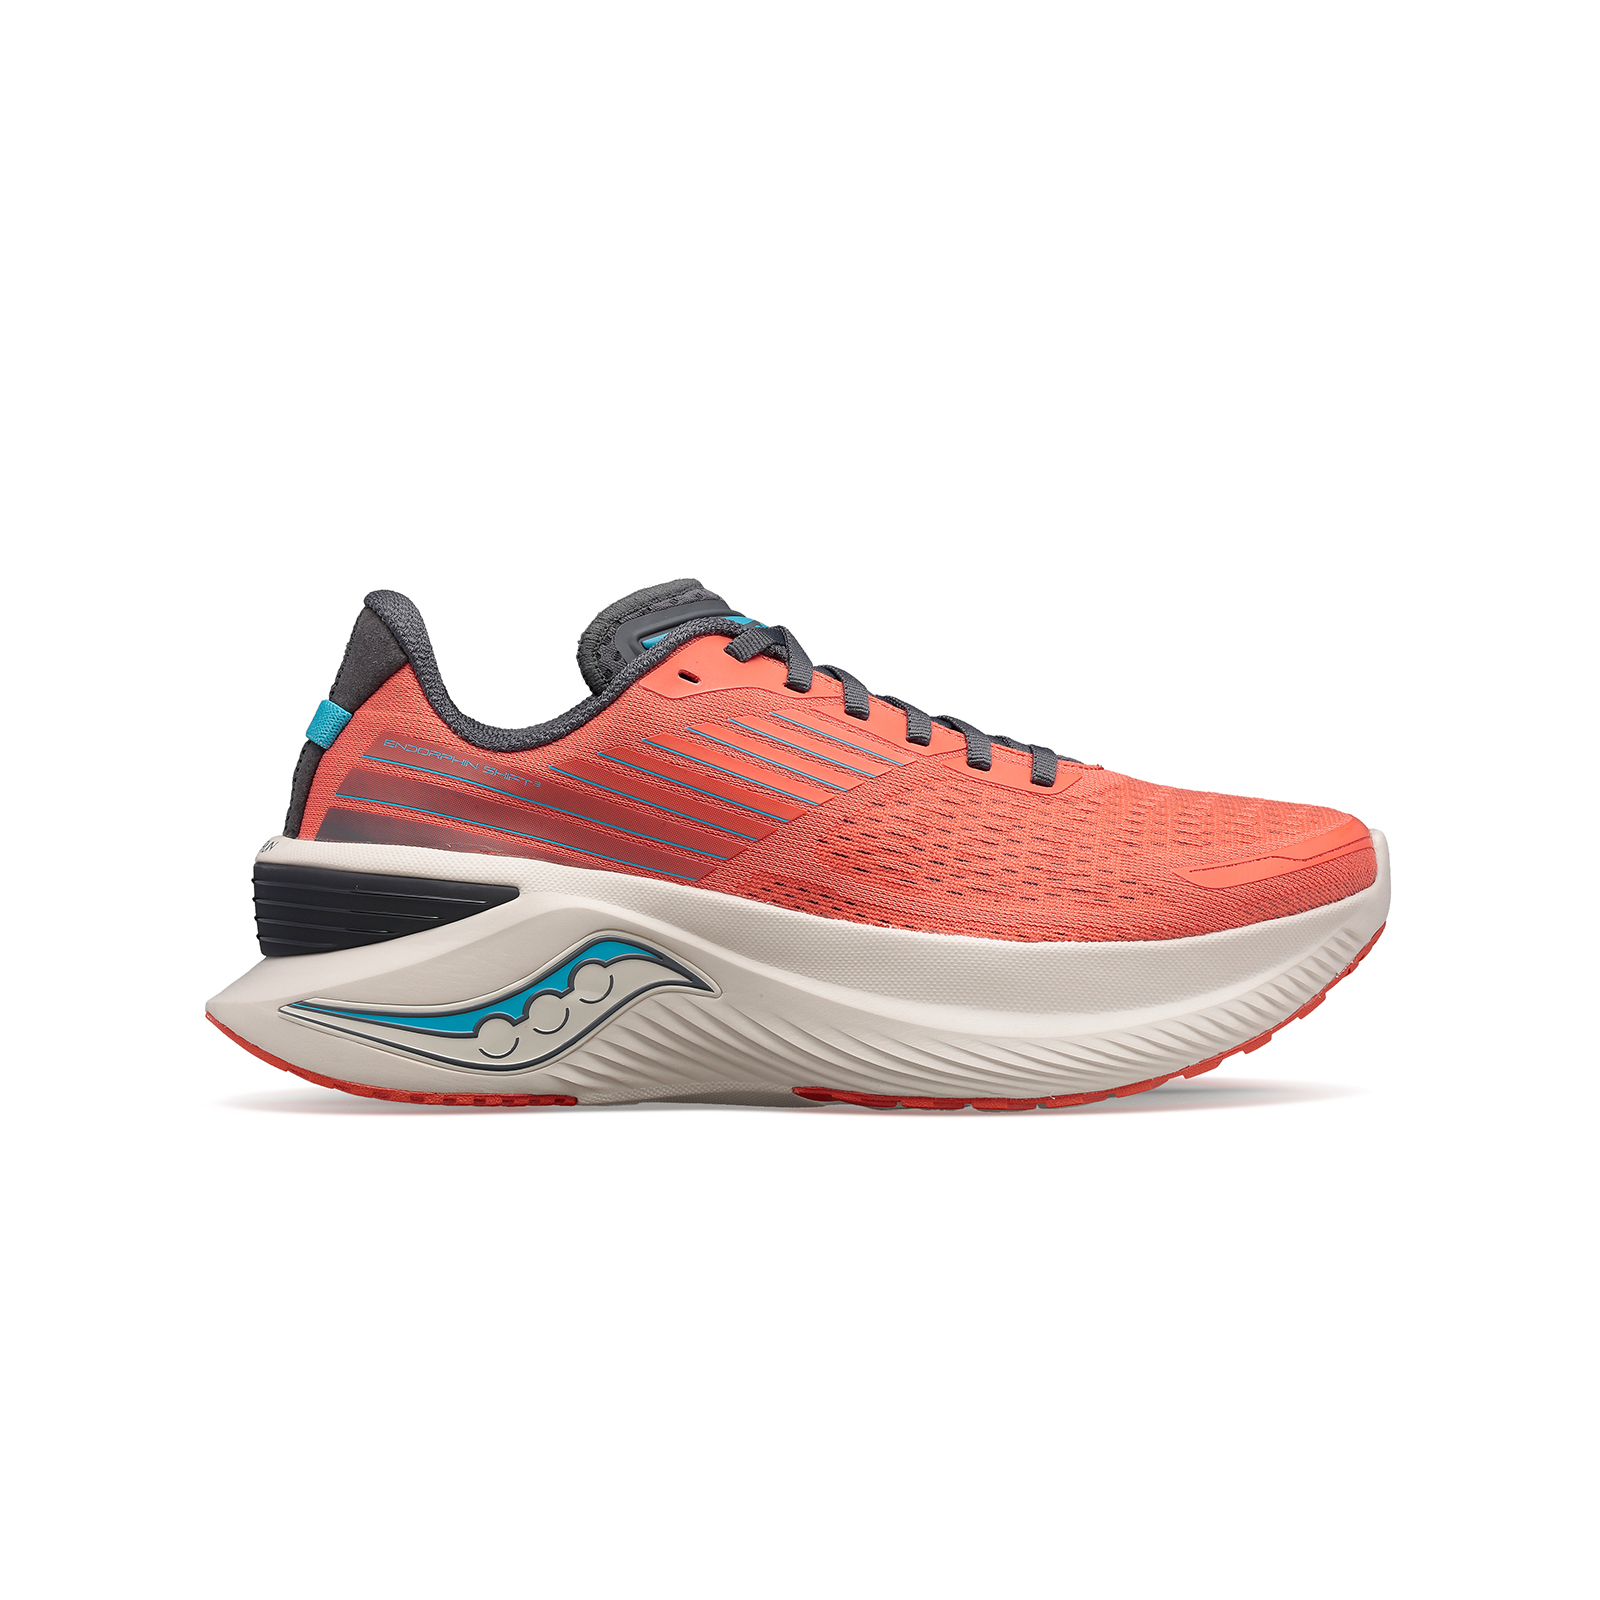 Saucony - S10813 ENDORPHIN SHIFT 3 FOOTWEAR - CORAL PINK ANTHRACITE Γυναικεία > Παπούτσια > Αθλητικά > Παπούτσι Low Cut